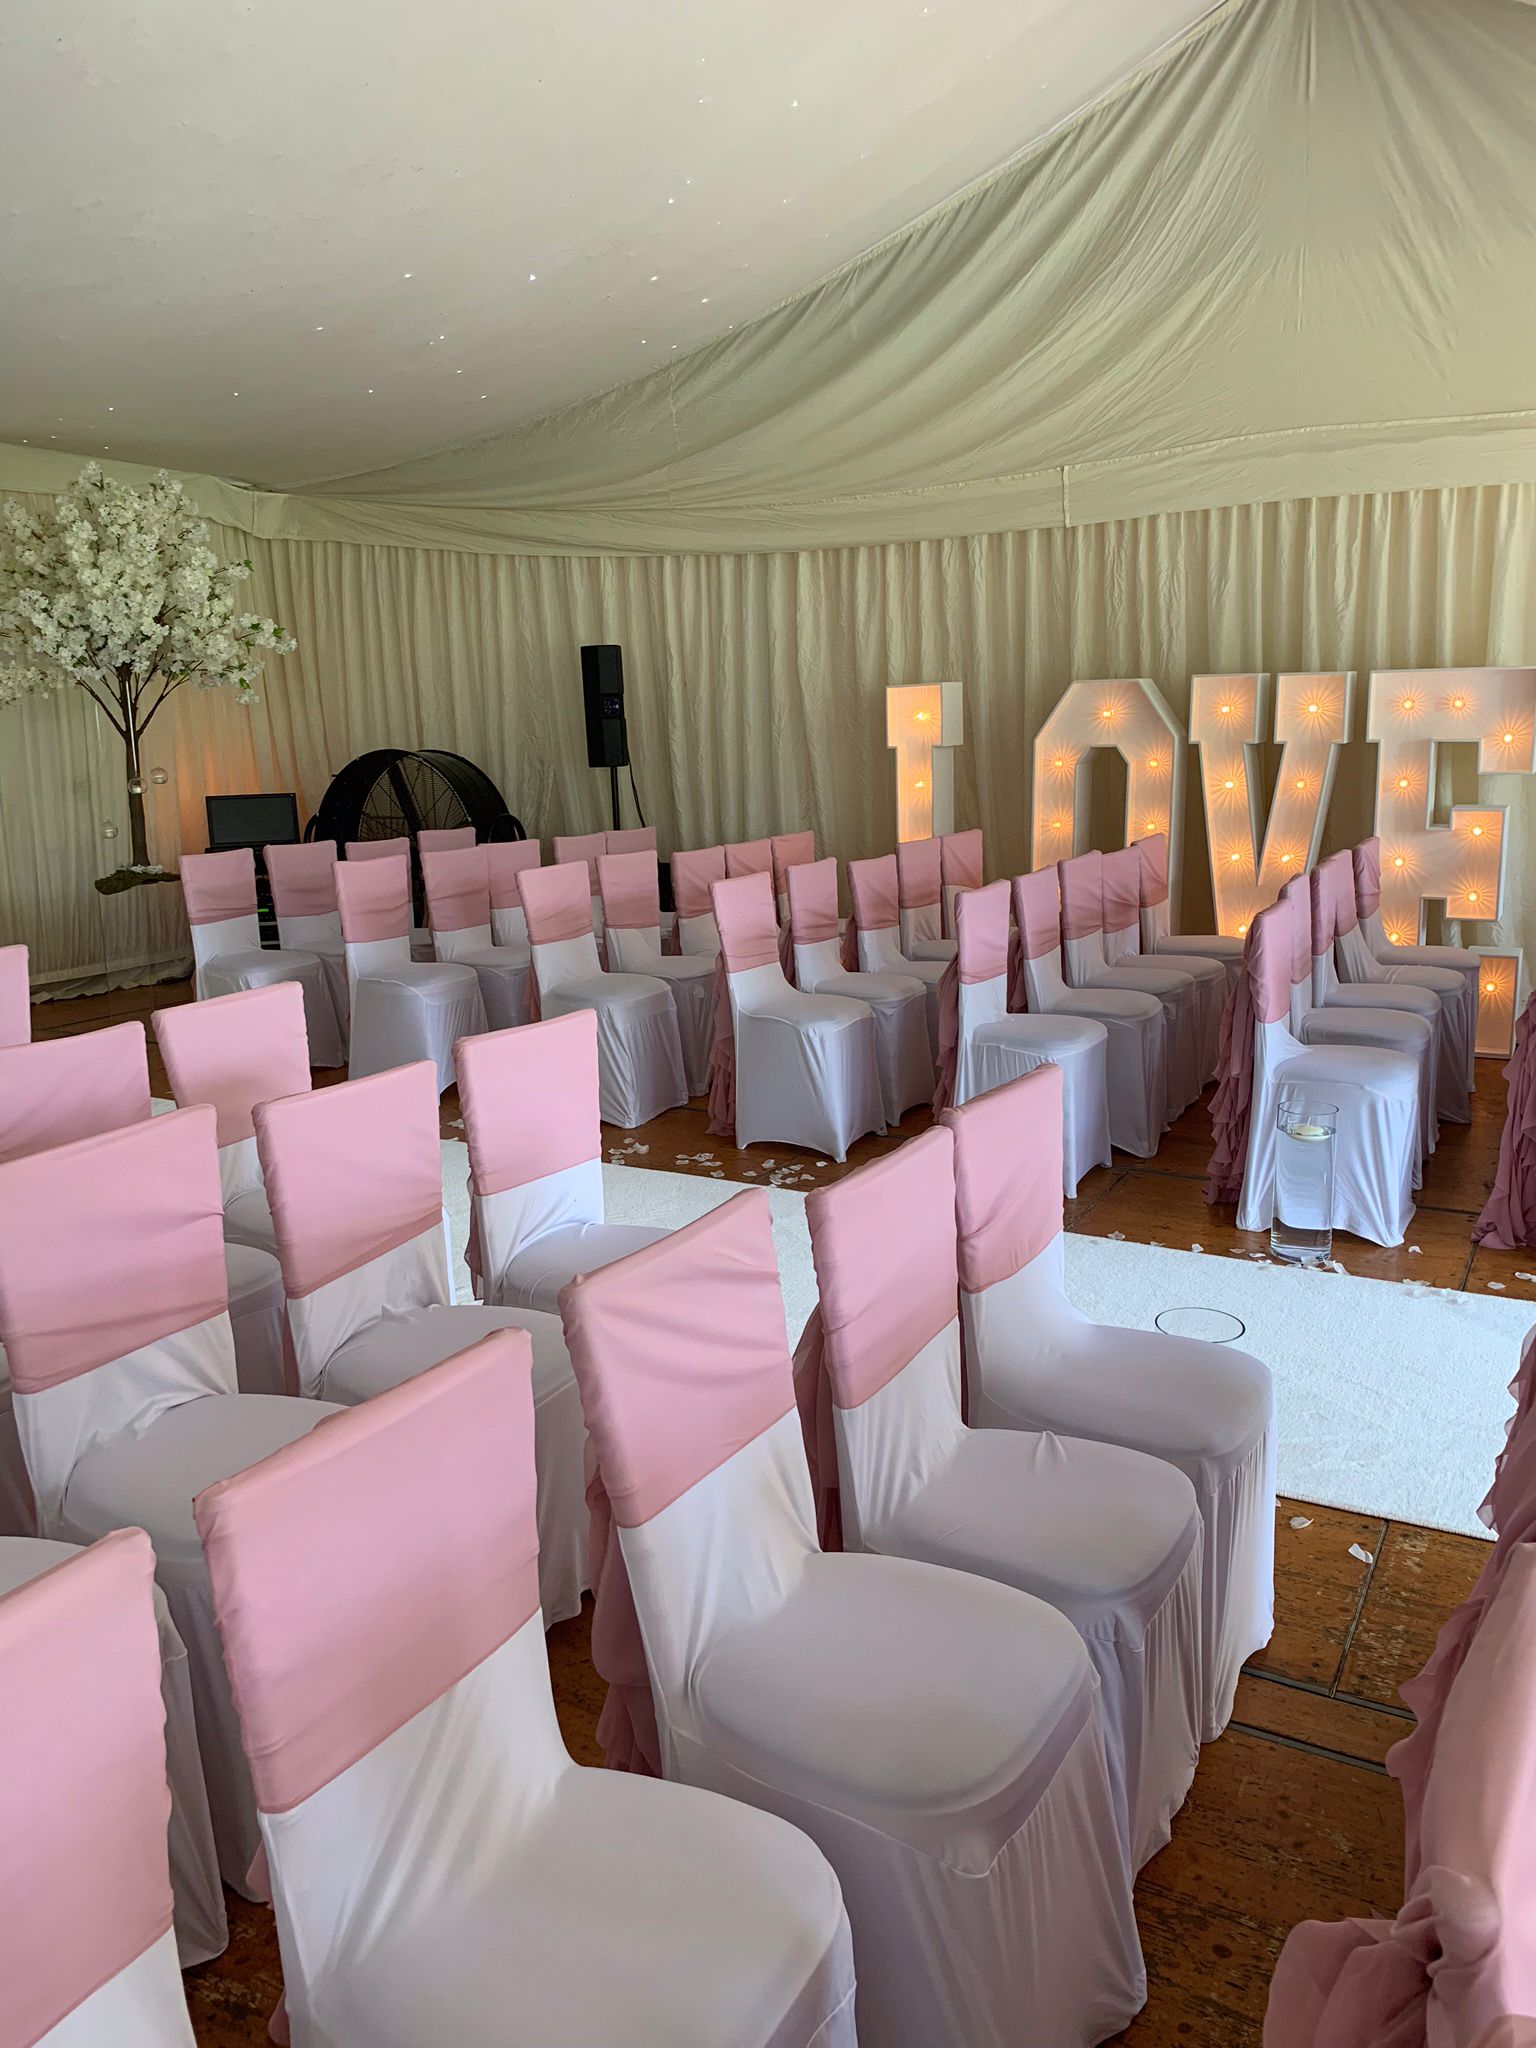 Brilliant pink sashes draped over the back of white chairs. Chairs ready to receive a wedding ceremony